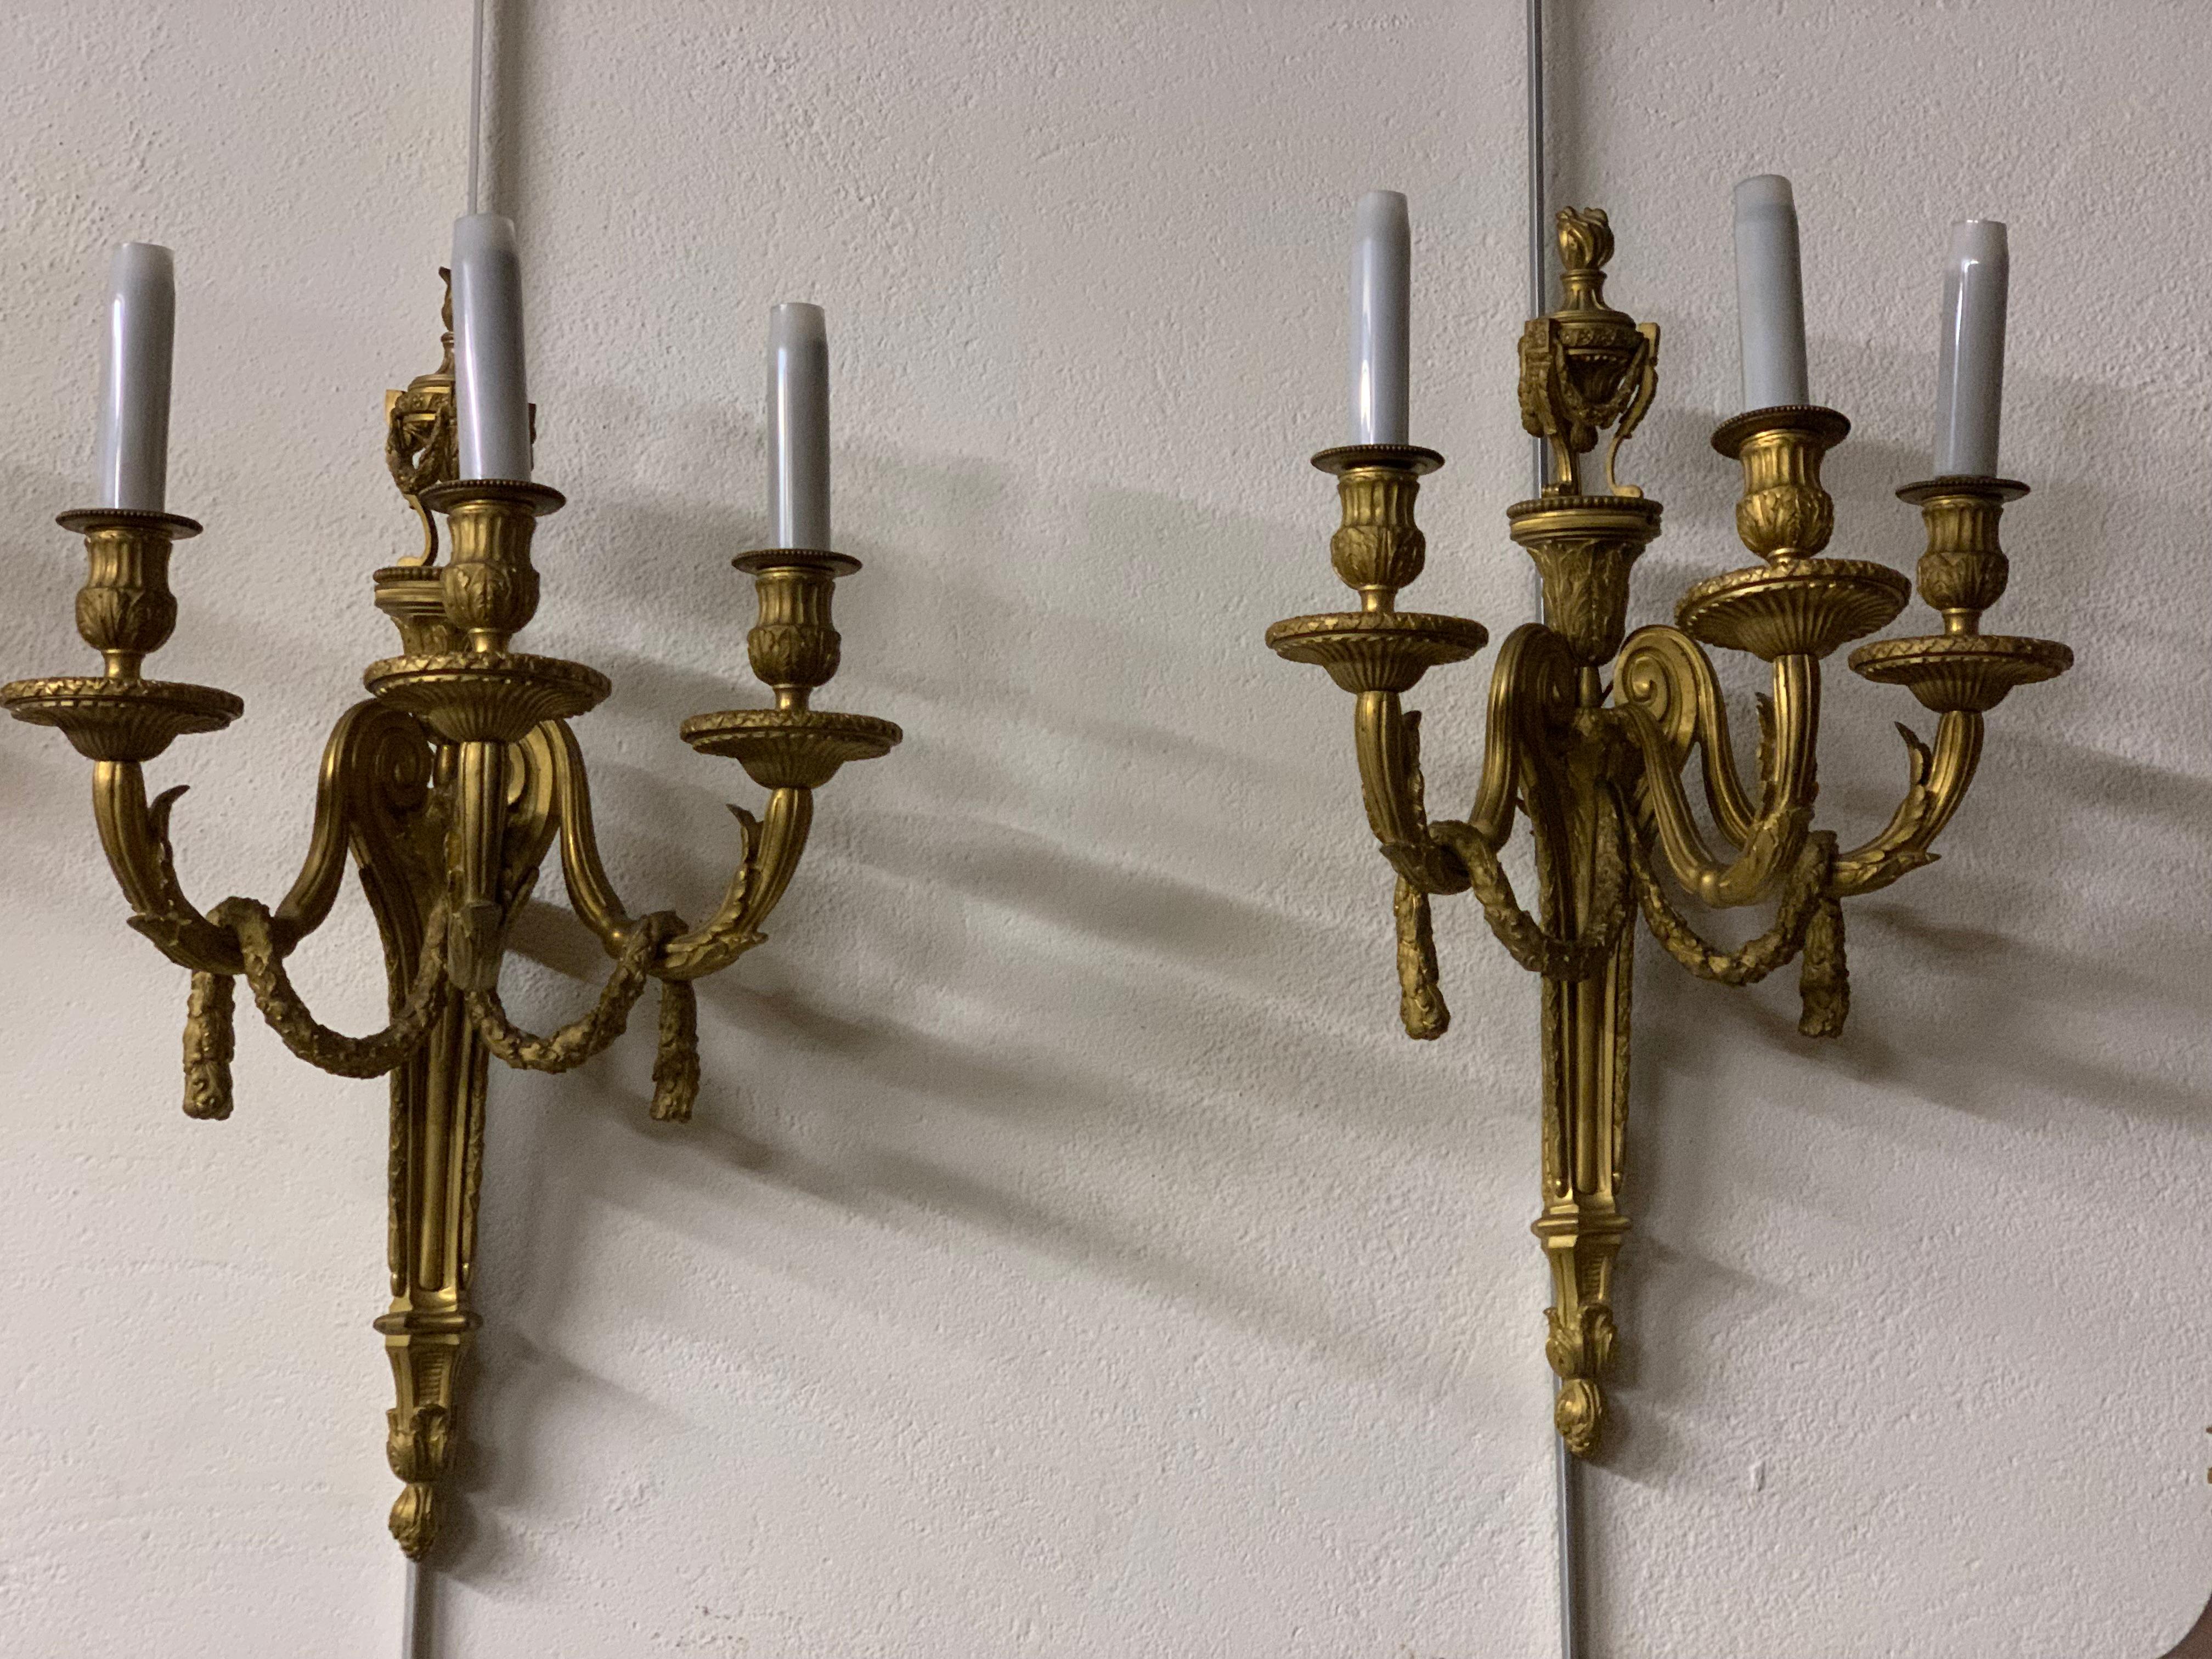 Whismical pair of sconces gilt bronze three lights ,louis XVI style after a famous model executed by Delafosse one of the best bronzier of his time 
this  pair is finely executed 